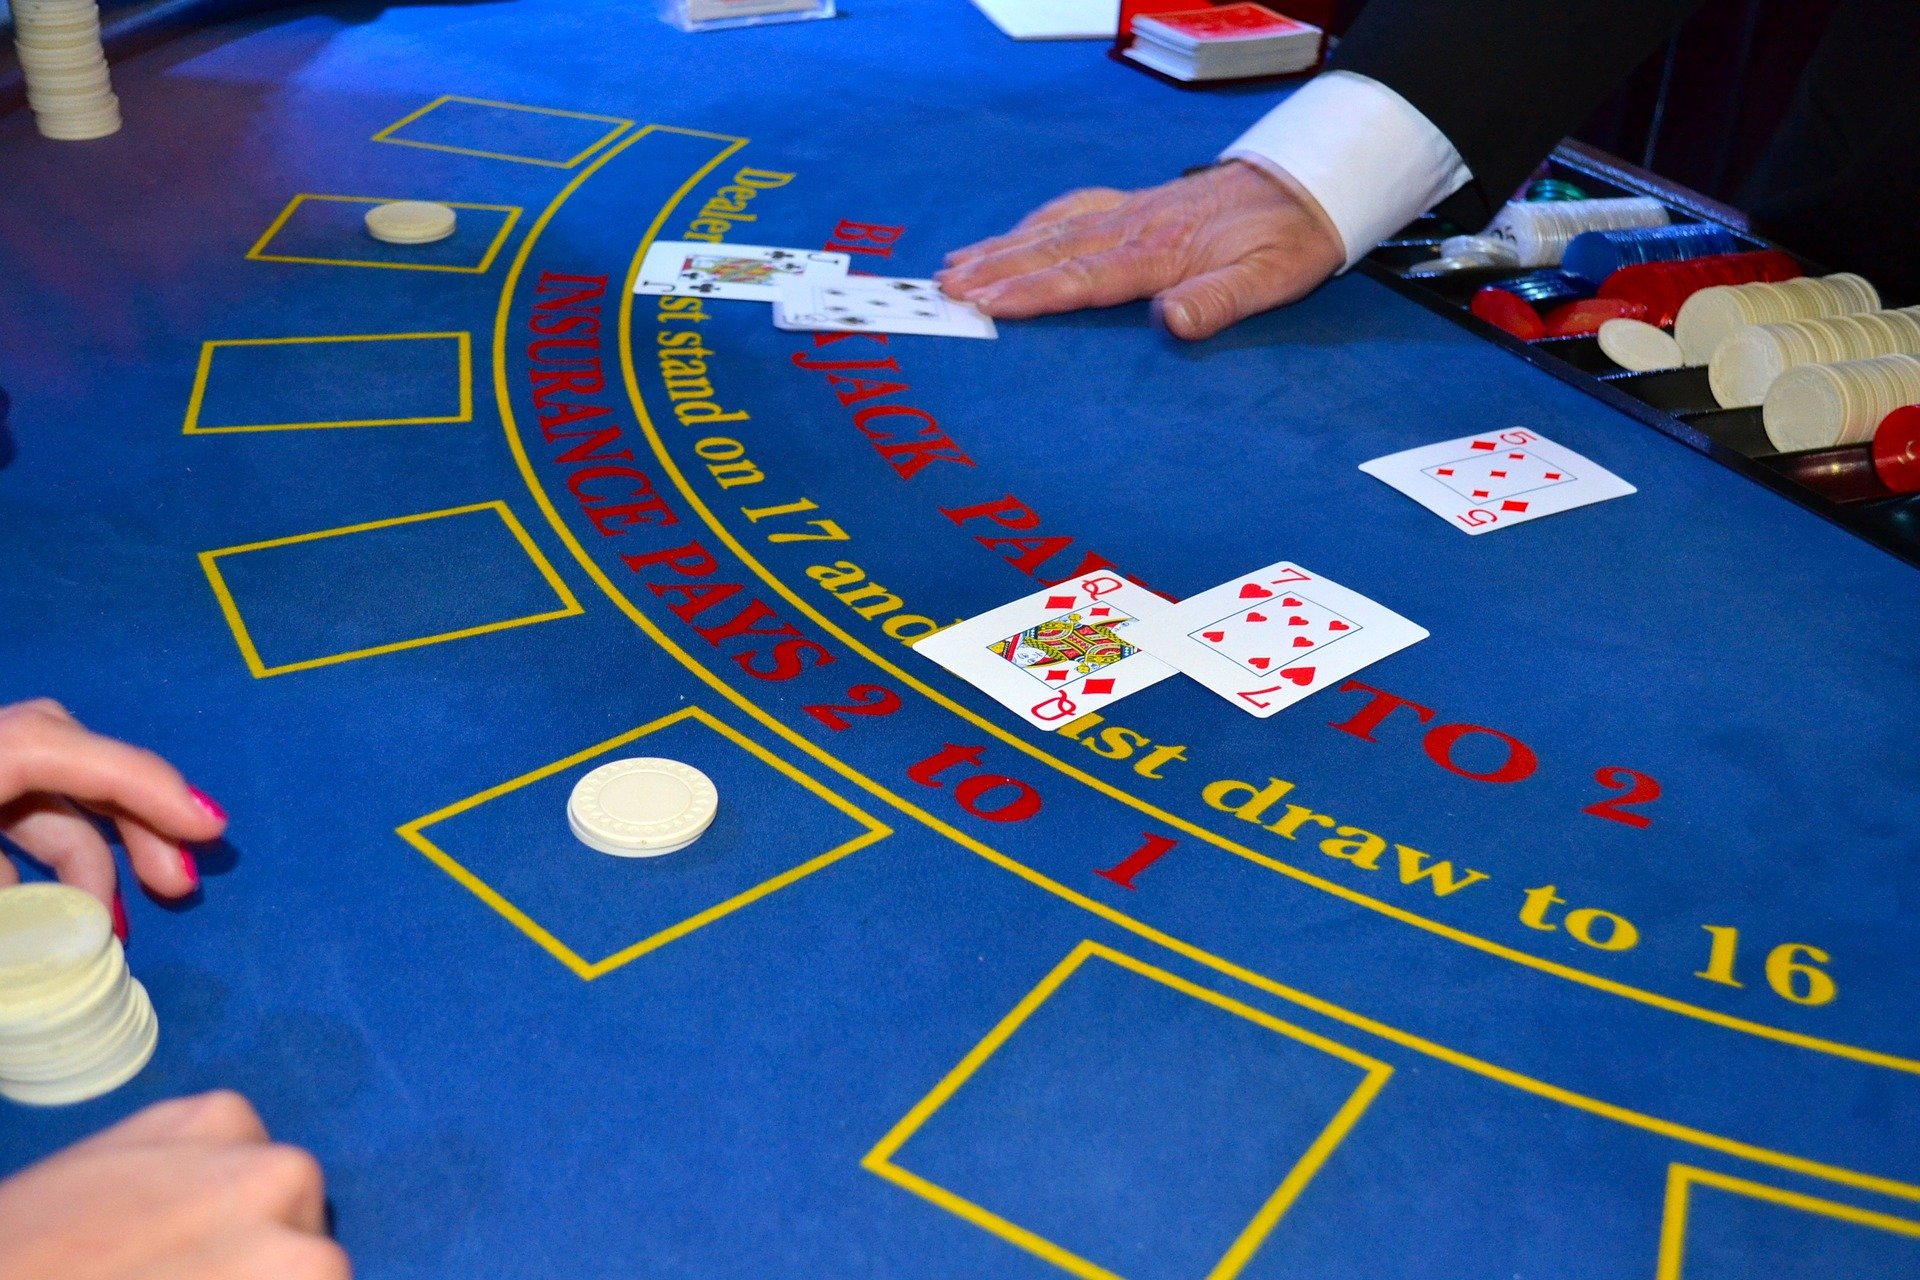 The are great live dealers casino games online